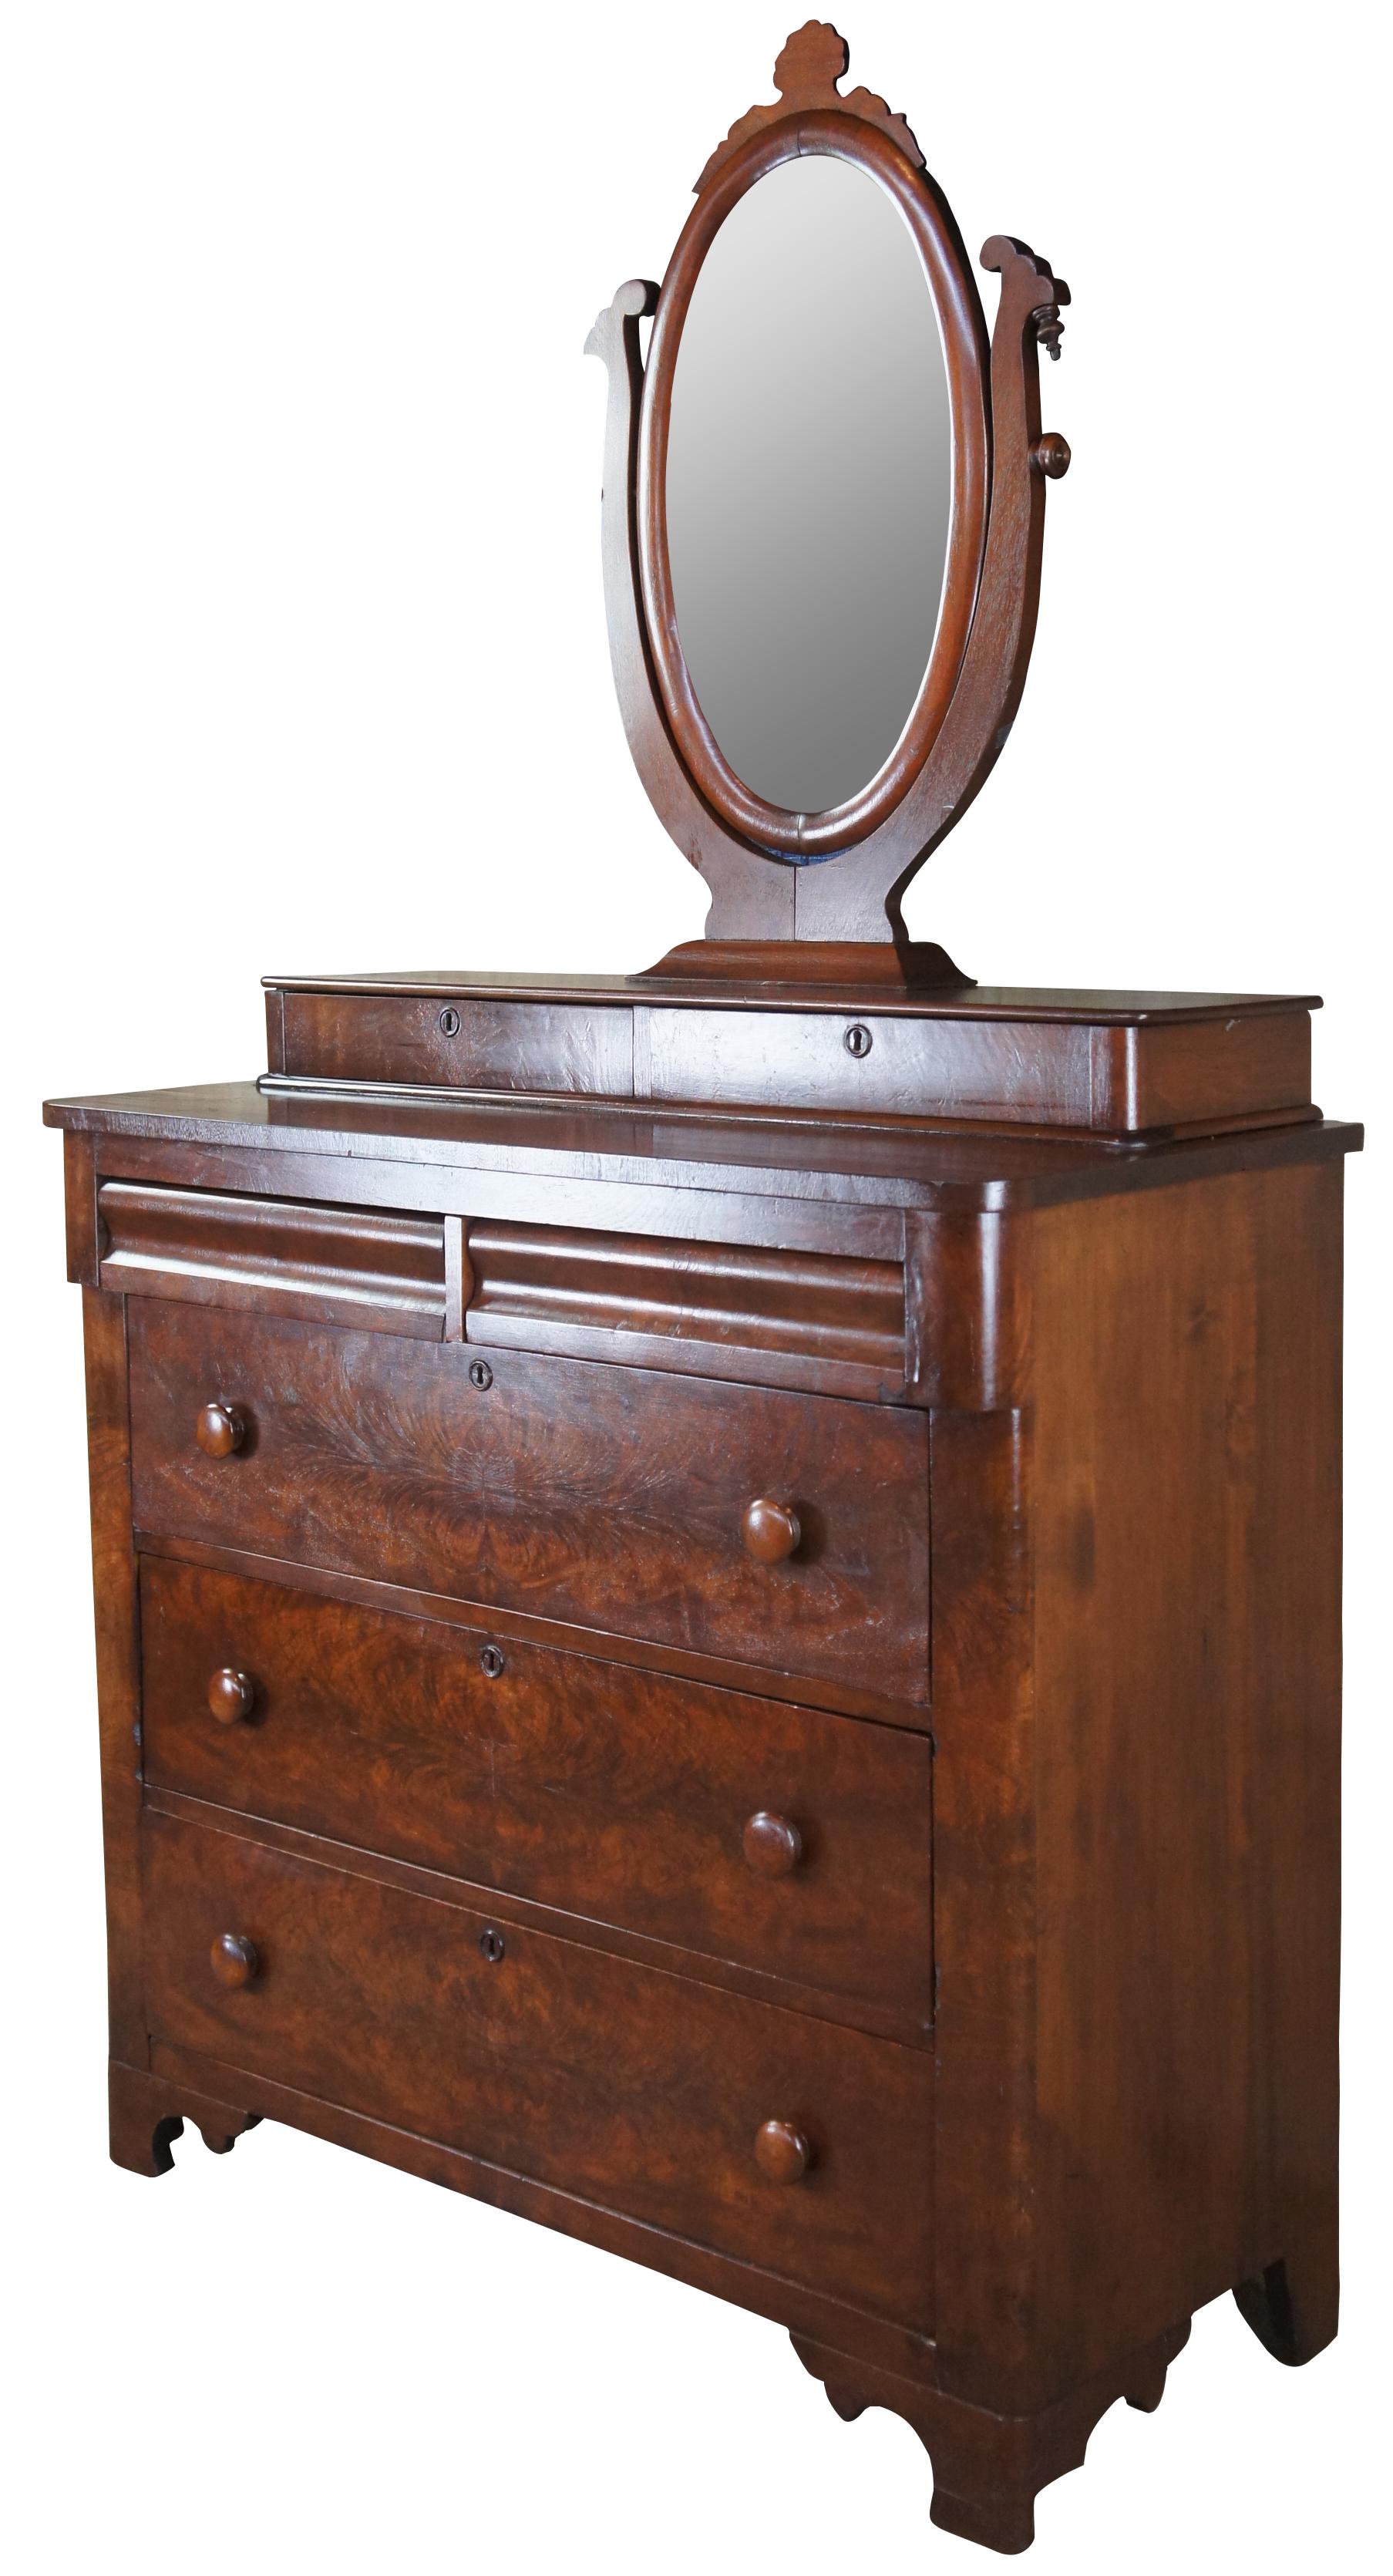 Antique American Empire mirror top dresser, circa 1860s Made from walnut featuring matchbook (burled) drawer fronts, a wishbone mirror, three full sized drawers, two upper drawers and two stepback glove box drawers.

Measures: 43.25